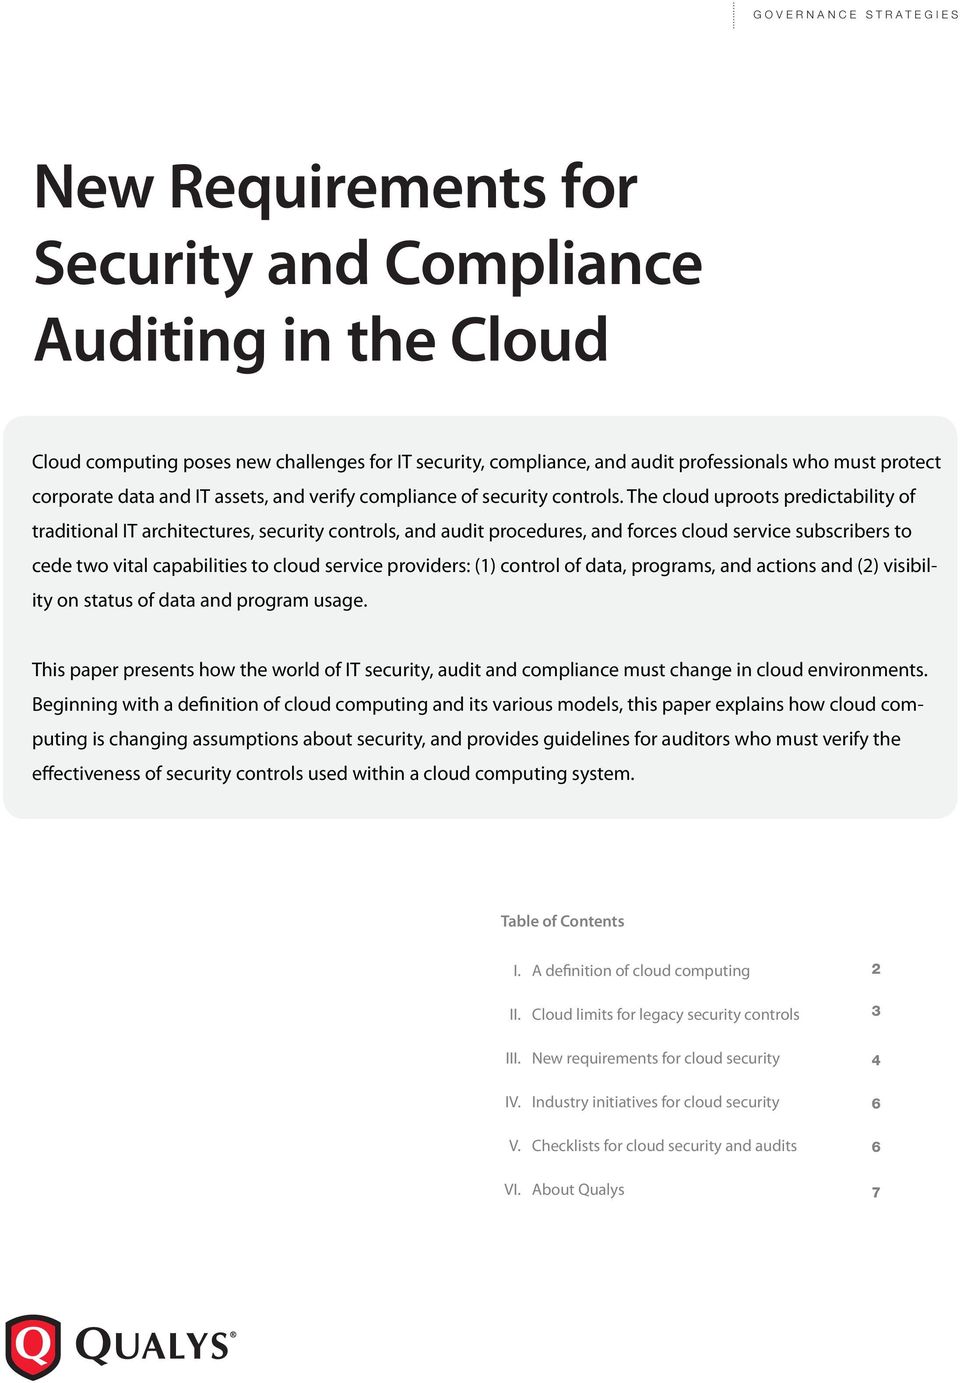 The cloud uproots predictability of traditional IT architectures, security controls, and audit procedures, and forces cloud service subscribers to cede two vital capabilities to cloud service